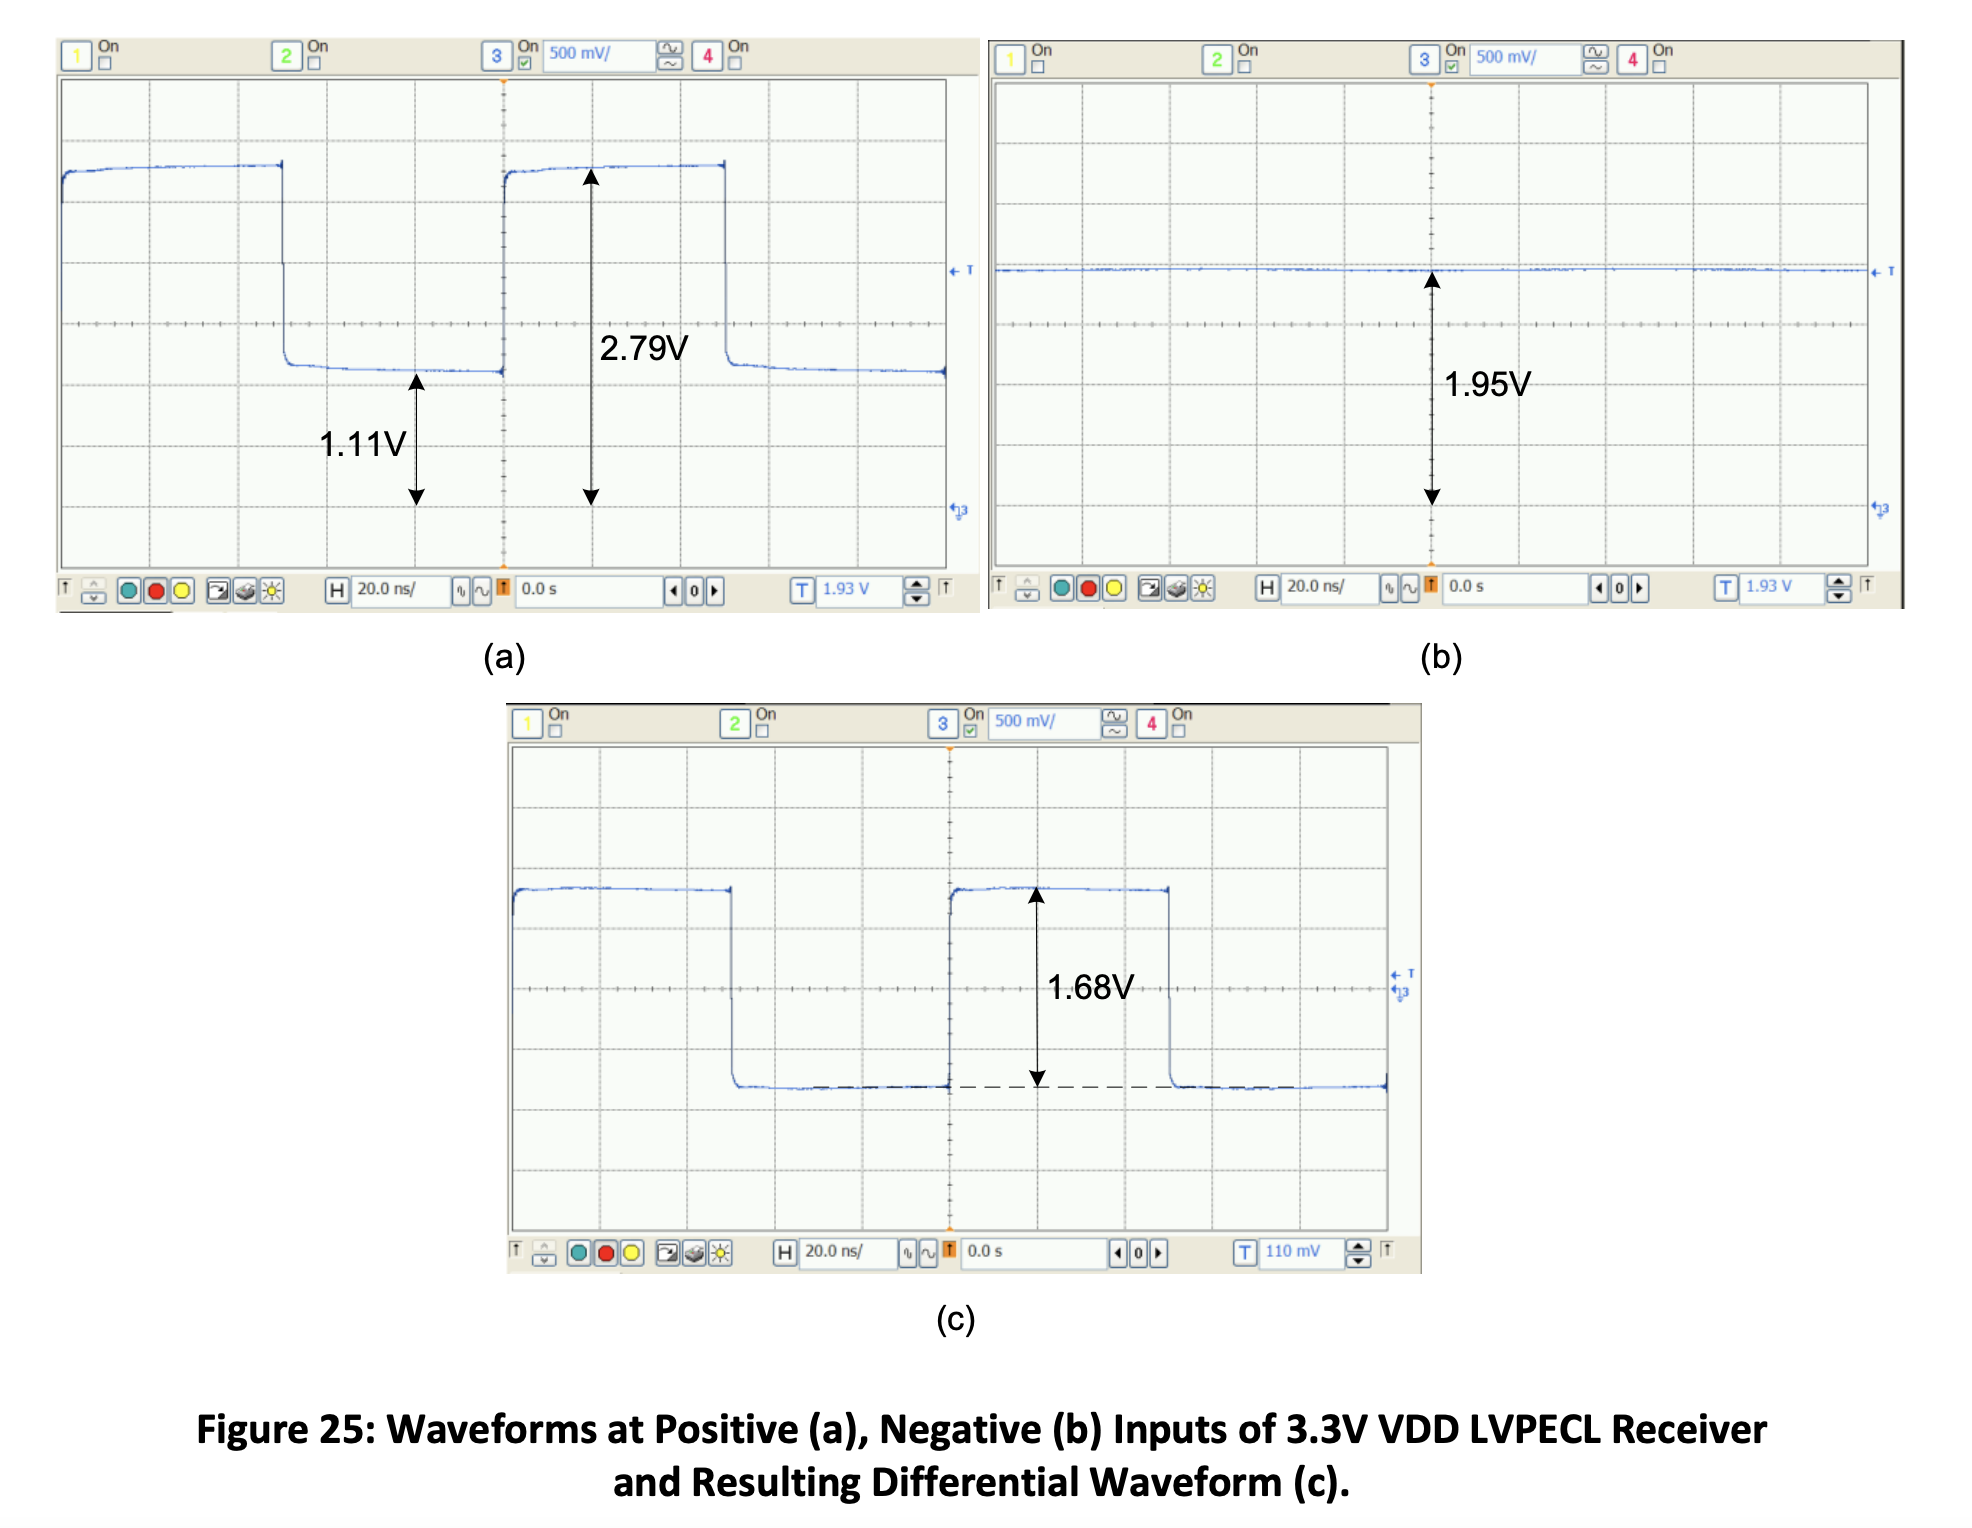 Figure 25: Waveforms at Positive (a), Negative (b) Inputs of 3.3V VDD LVPECL Receiver  and Resulting Differential Waveform (c). 